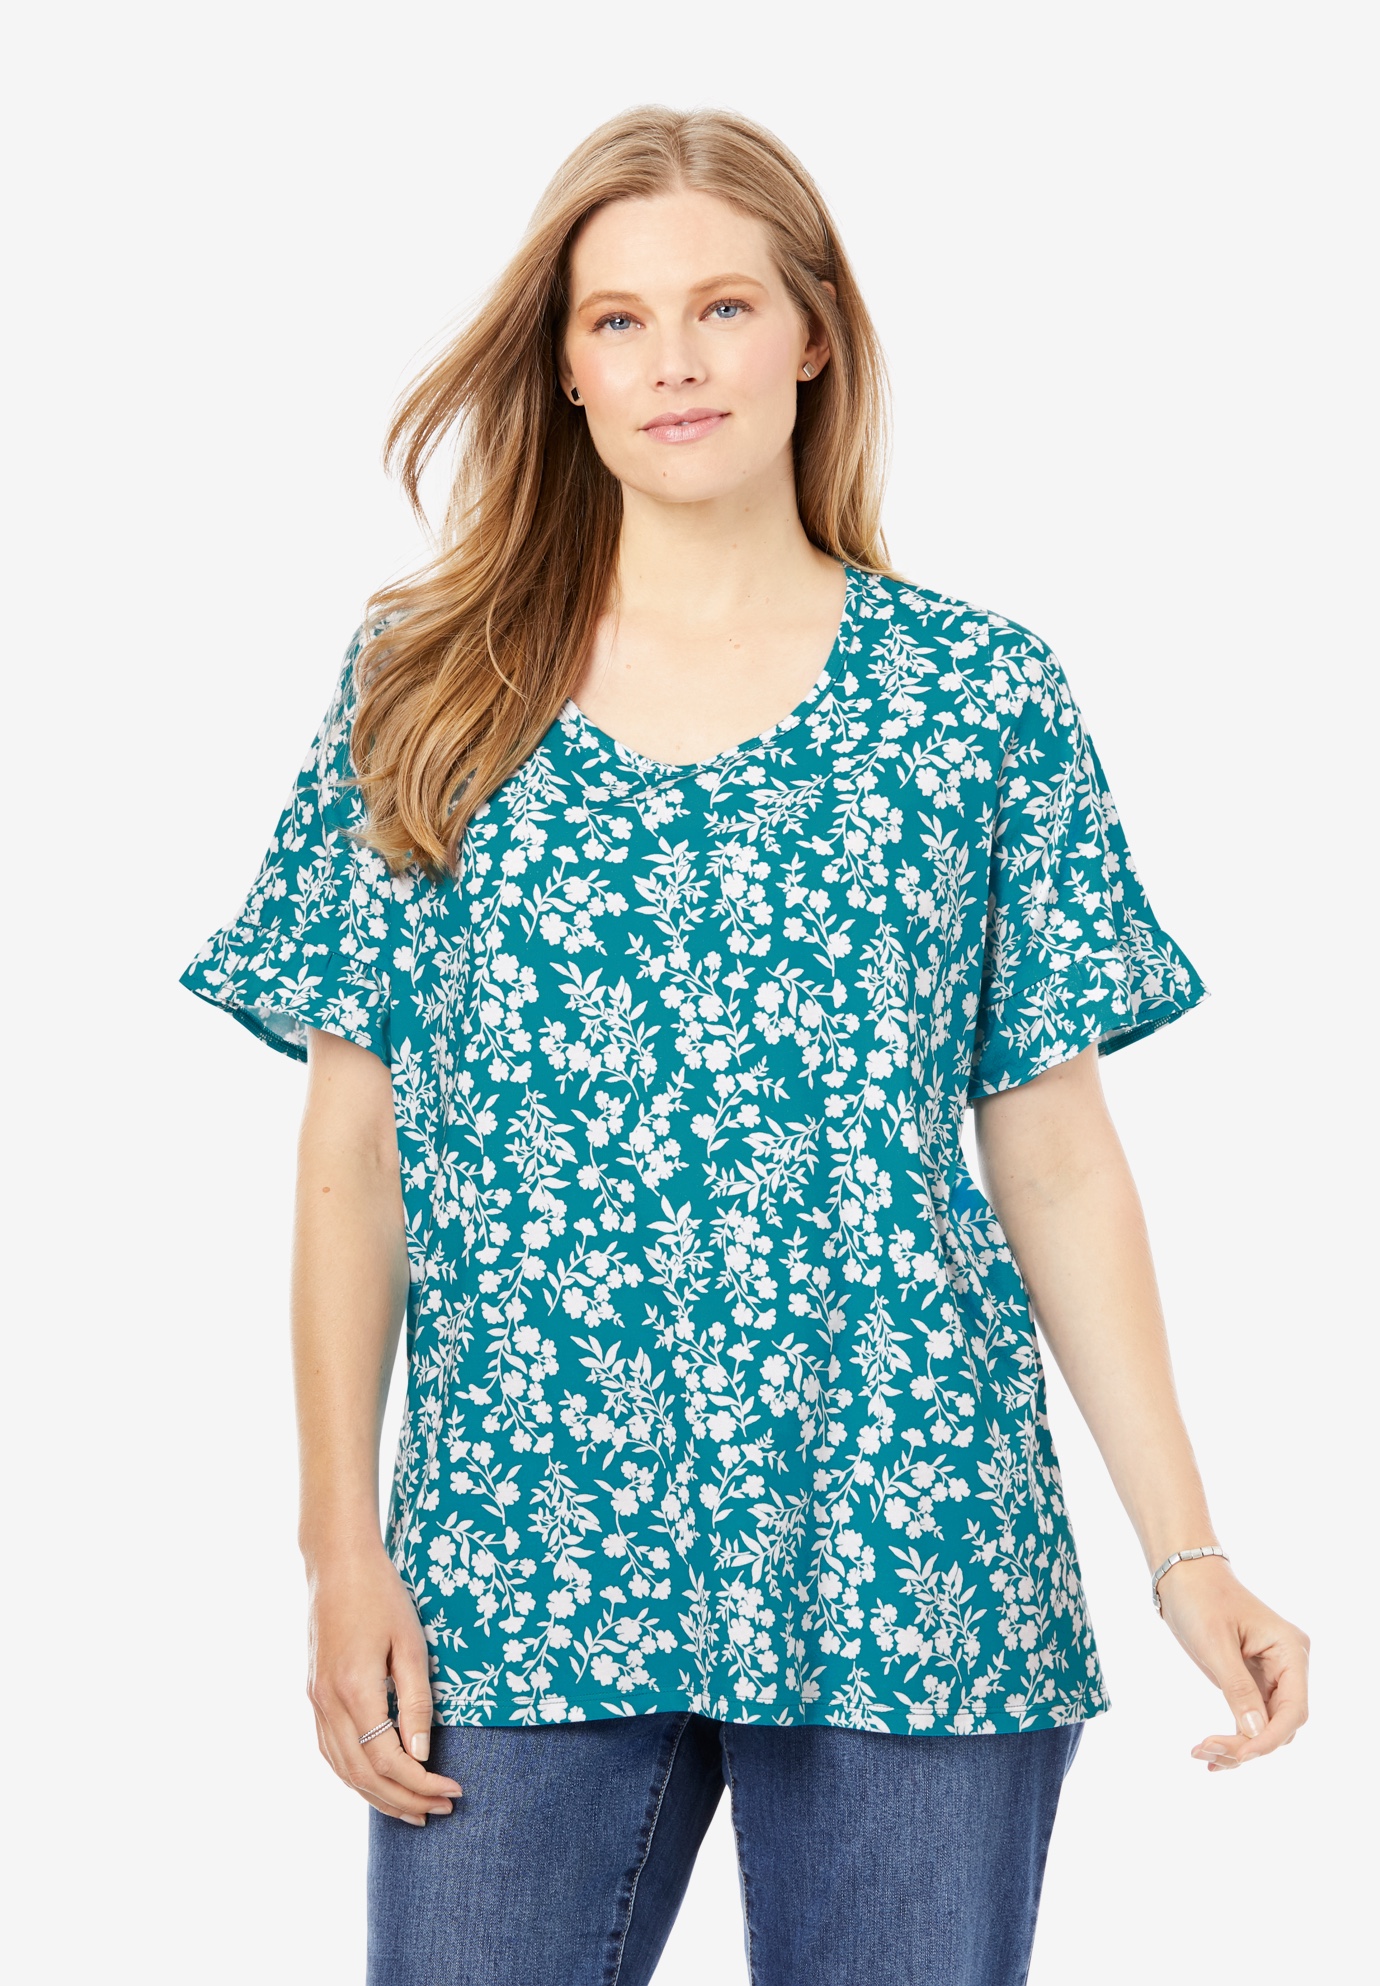 Ruffle Elbow-Sleeve Tee| Plus Size T-Shirts | Woman Within